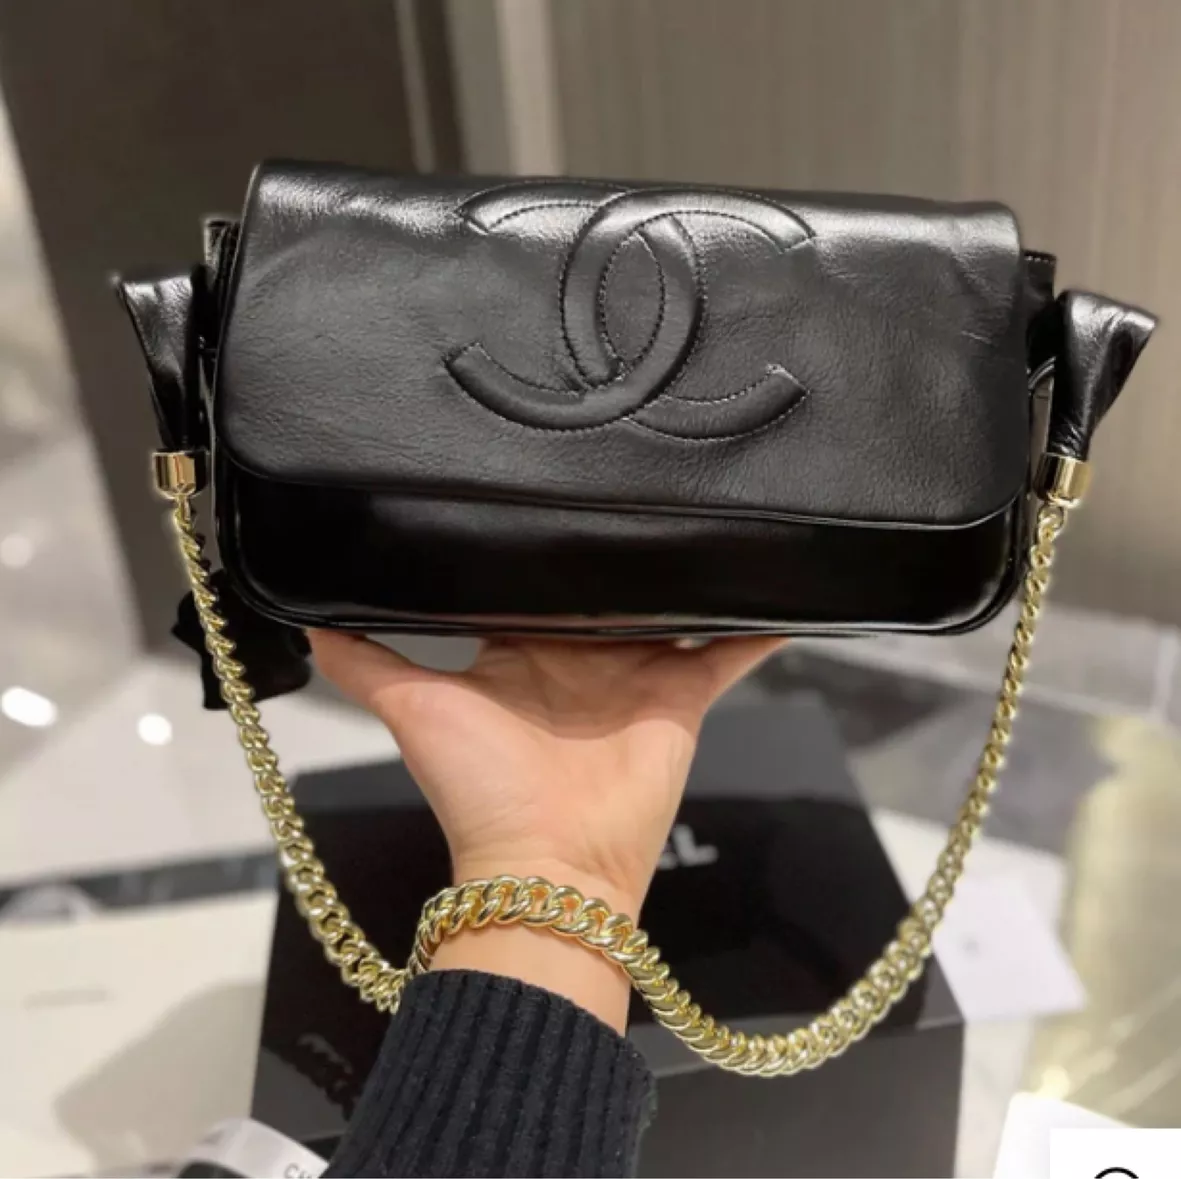 Chanel bag by Dhgate, does it look like a 1:1? : r/RepladiesDesigner